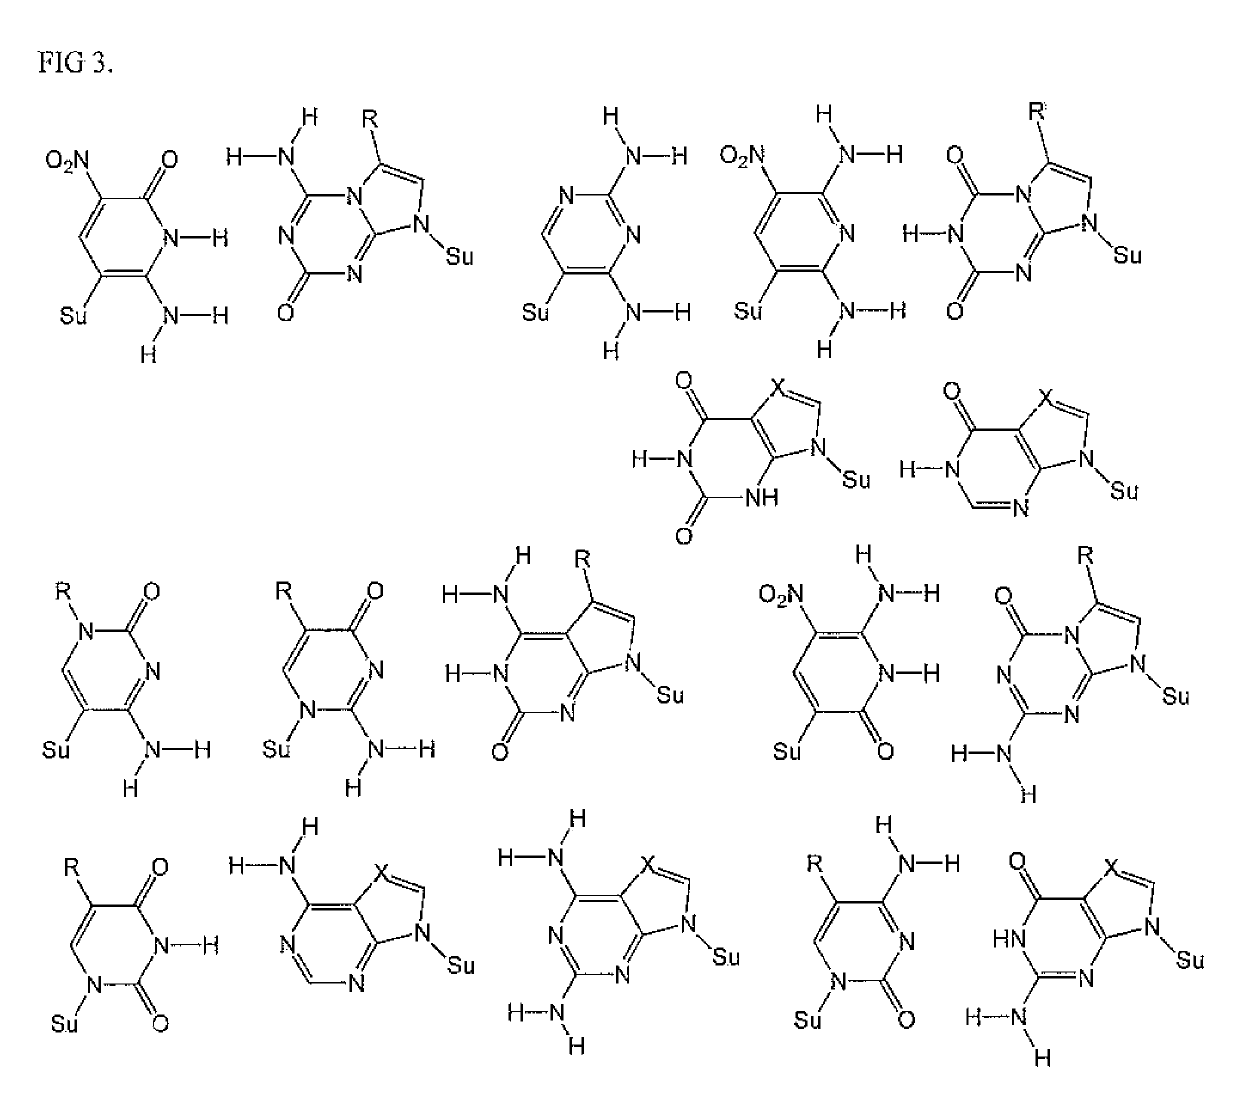 Nucleoside triphosphates with stable aminoxy groups